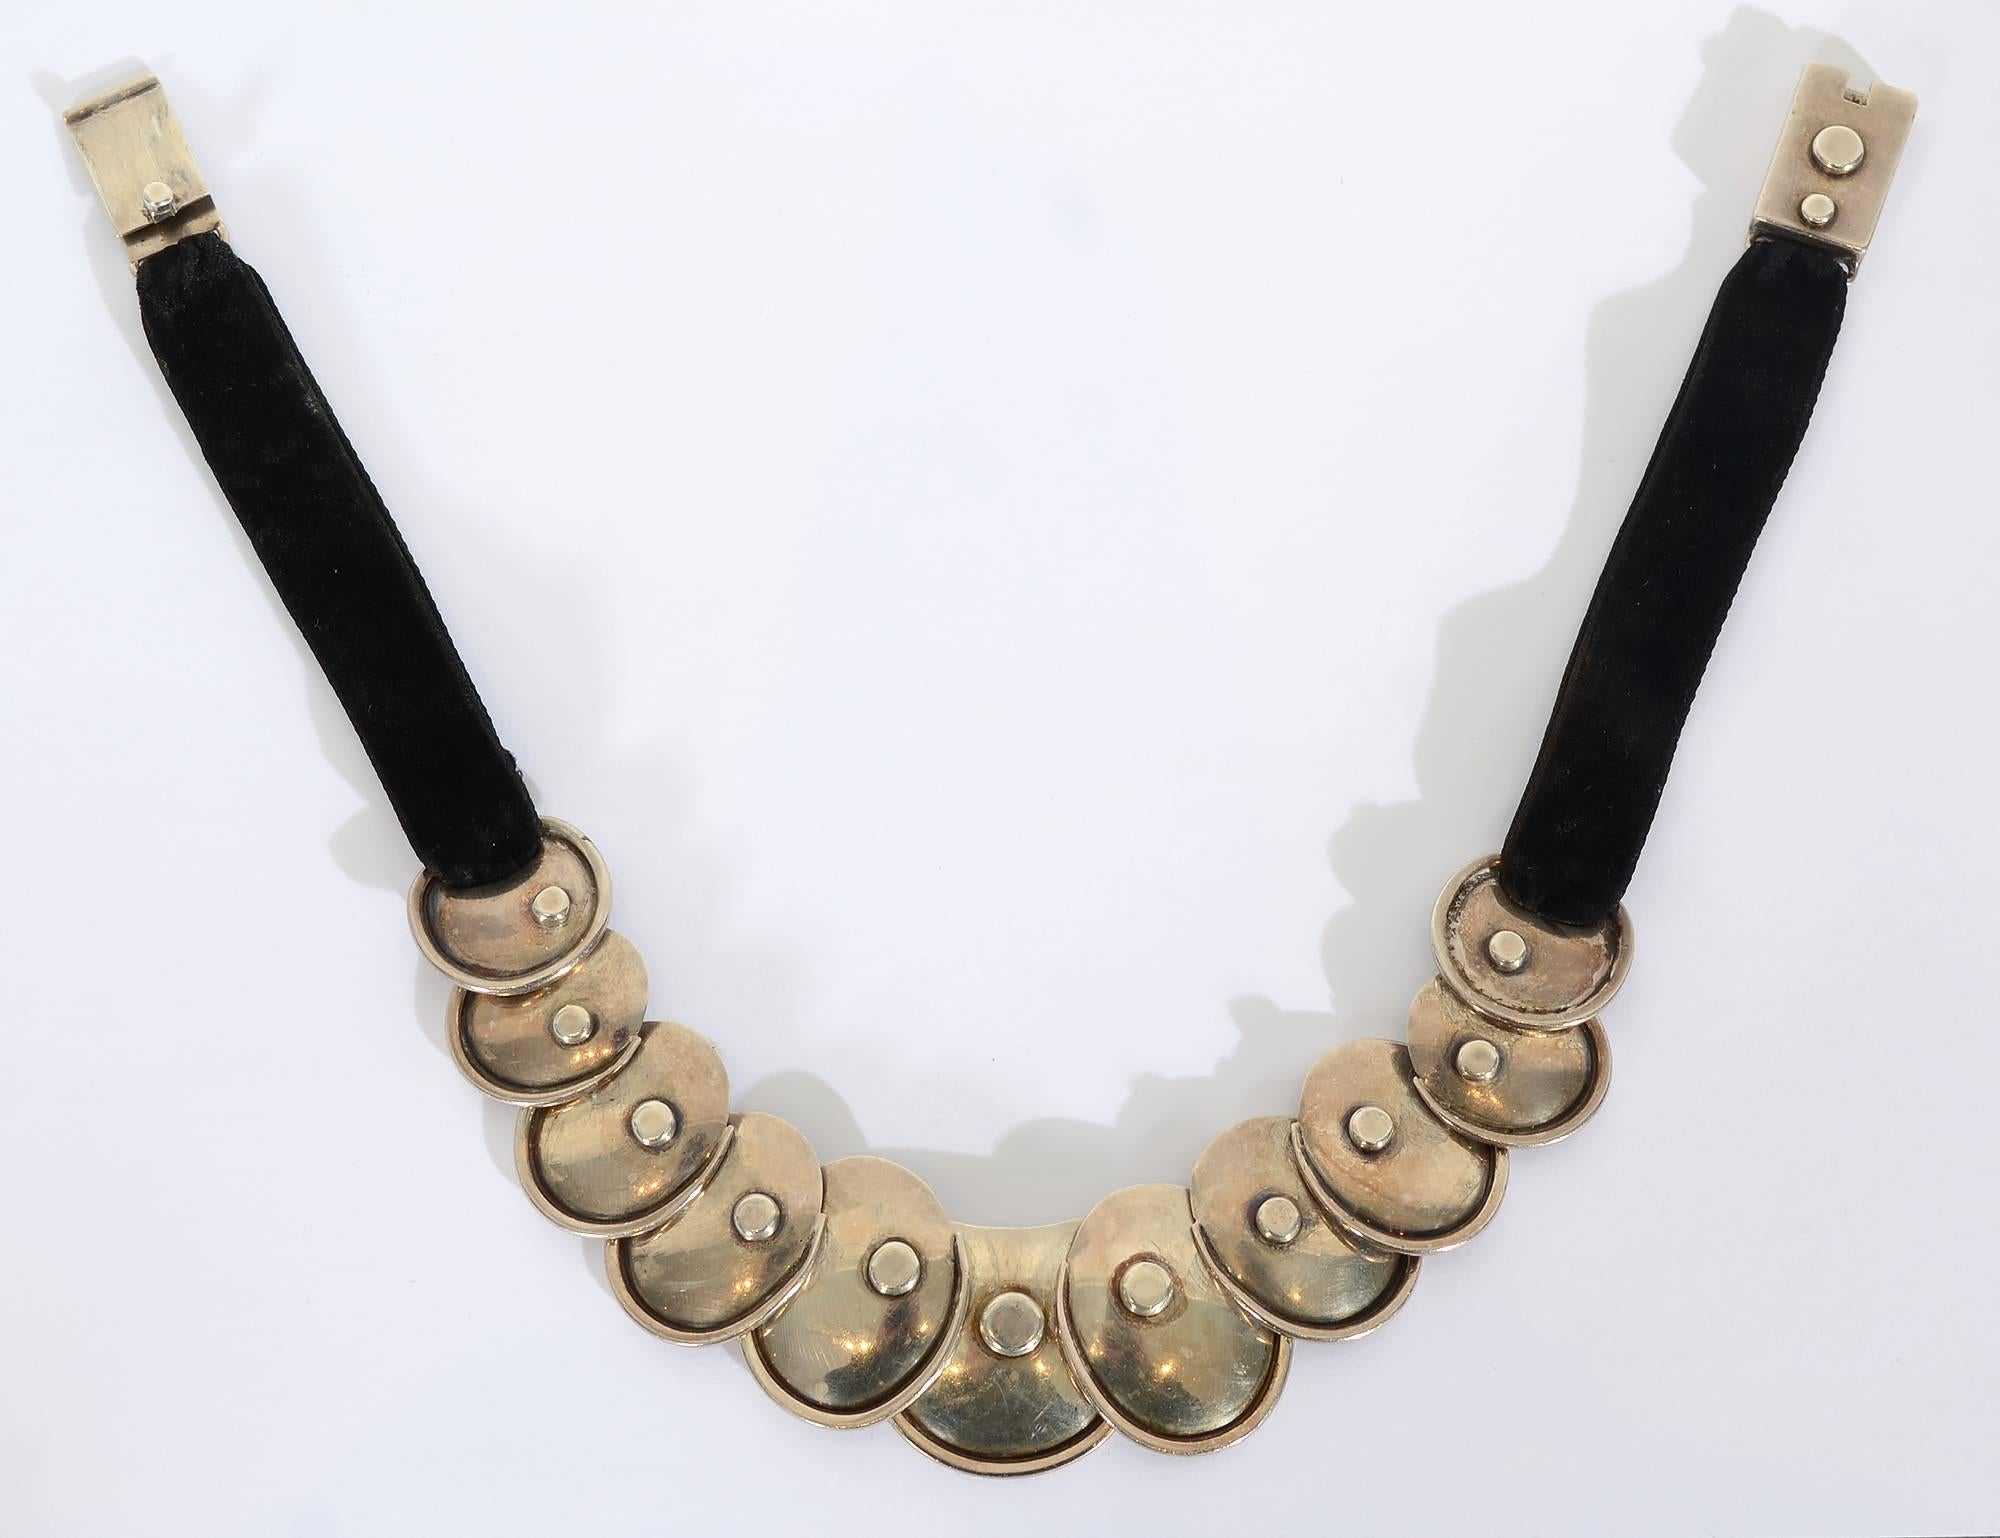 This Armadillo necklace by Hector Aguilar was one of his most popular, rarely seen designs. Eleven oval silver discs overlap and are connected with rivets that are both decorative and functional in that they allow the discs to move freely. The discs